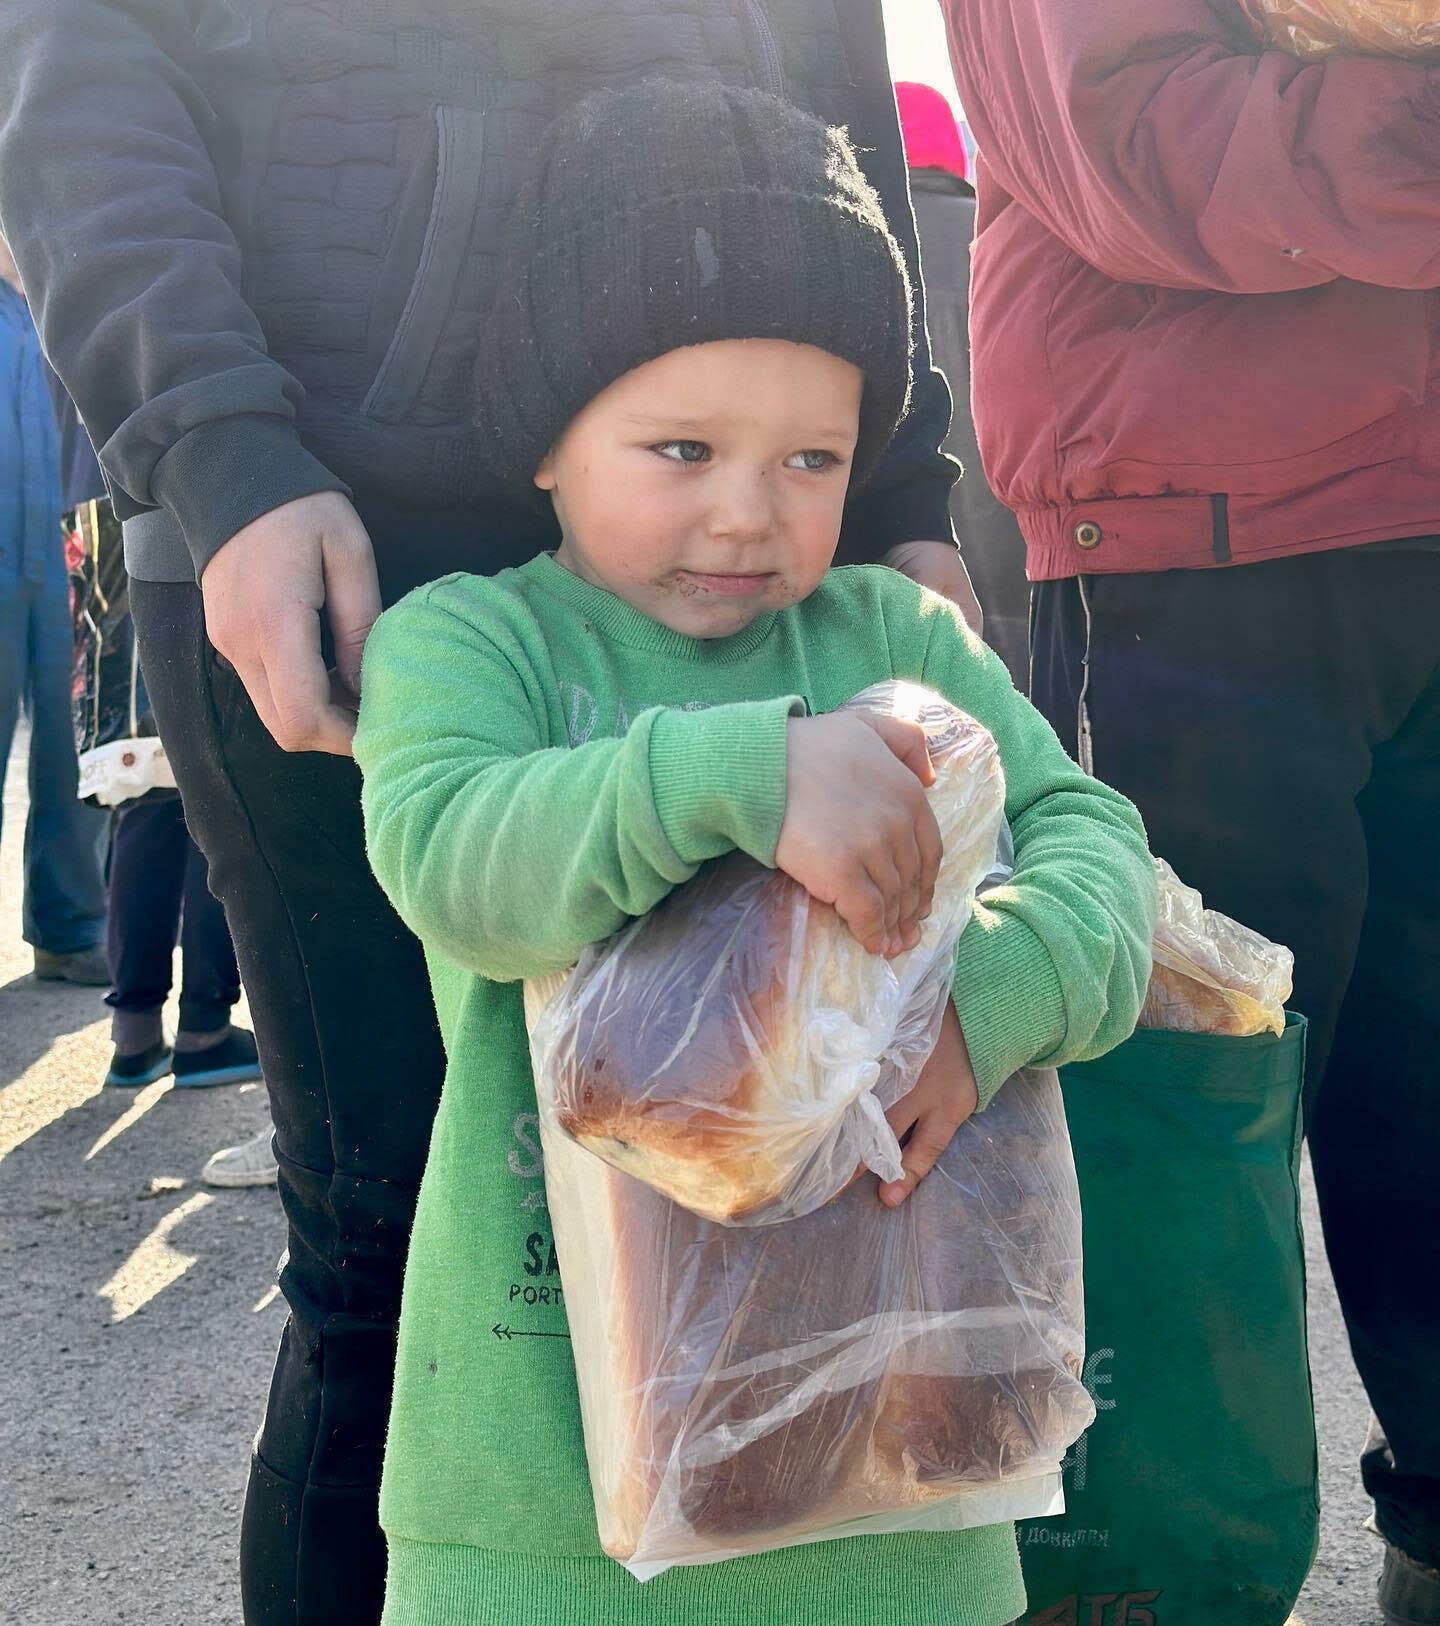 A young child in a green sweater and black beanie holds a large bag of bread while standing with an adult in a crowd.